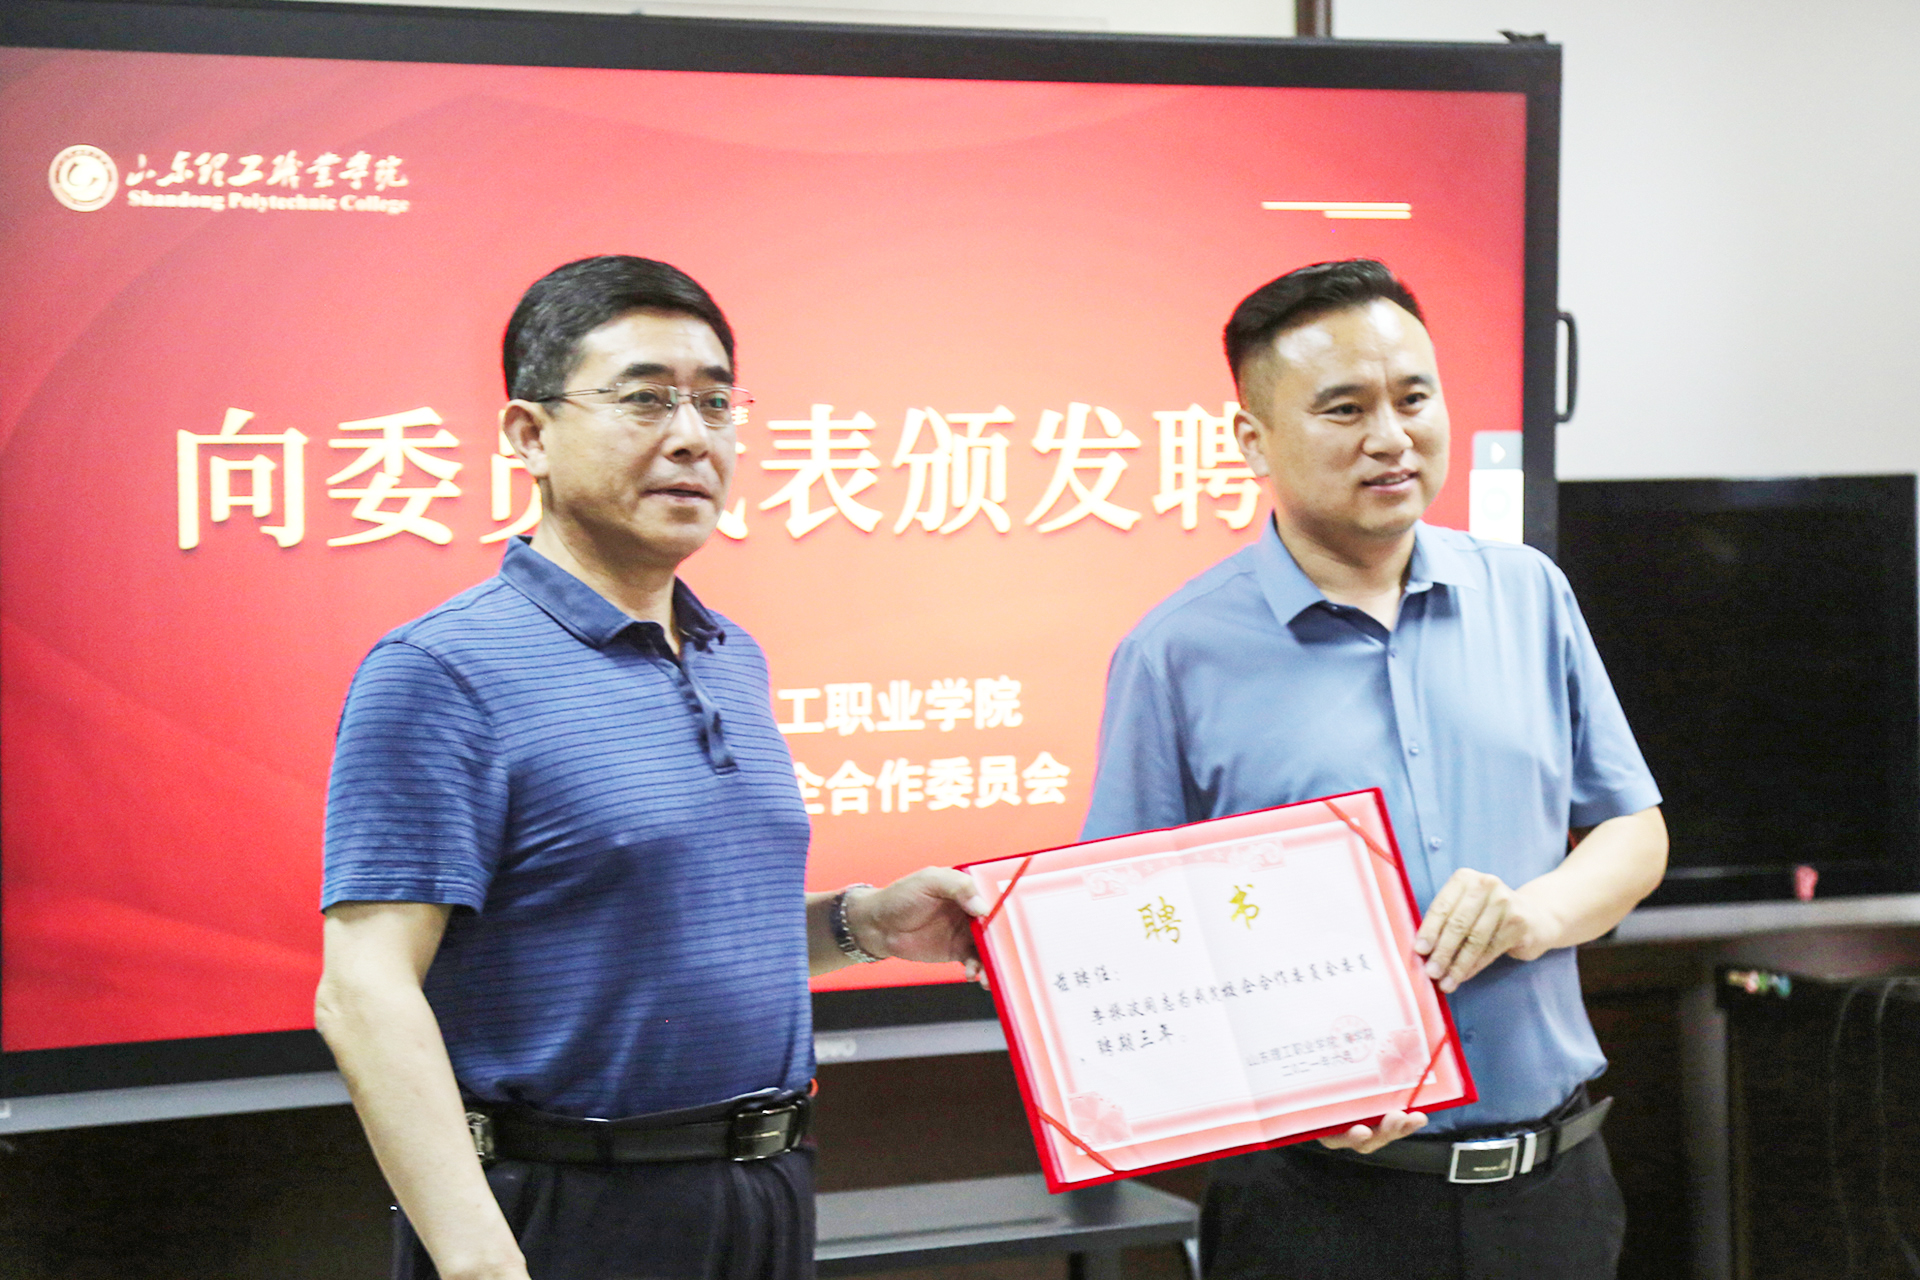 China Coal Group Participate In The School-Enterprise Cooperation Annual Meeting Of The Business School Of Shandong Polytechnic Vocational College